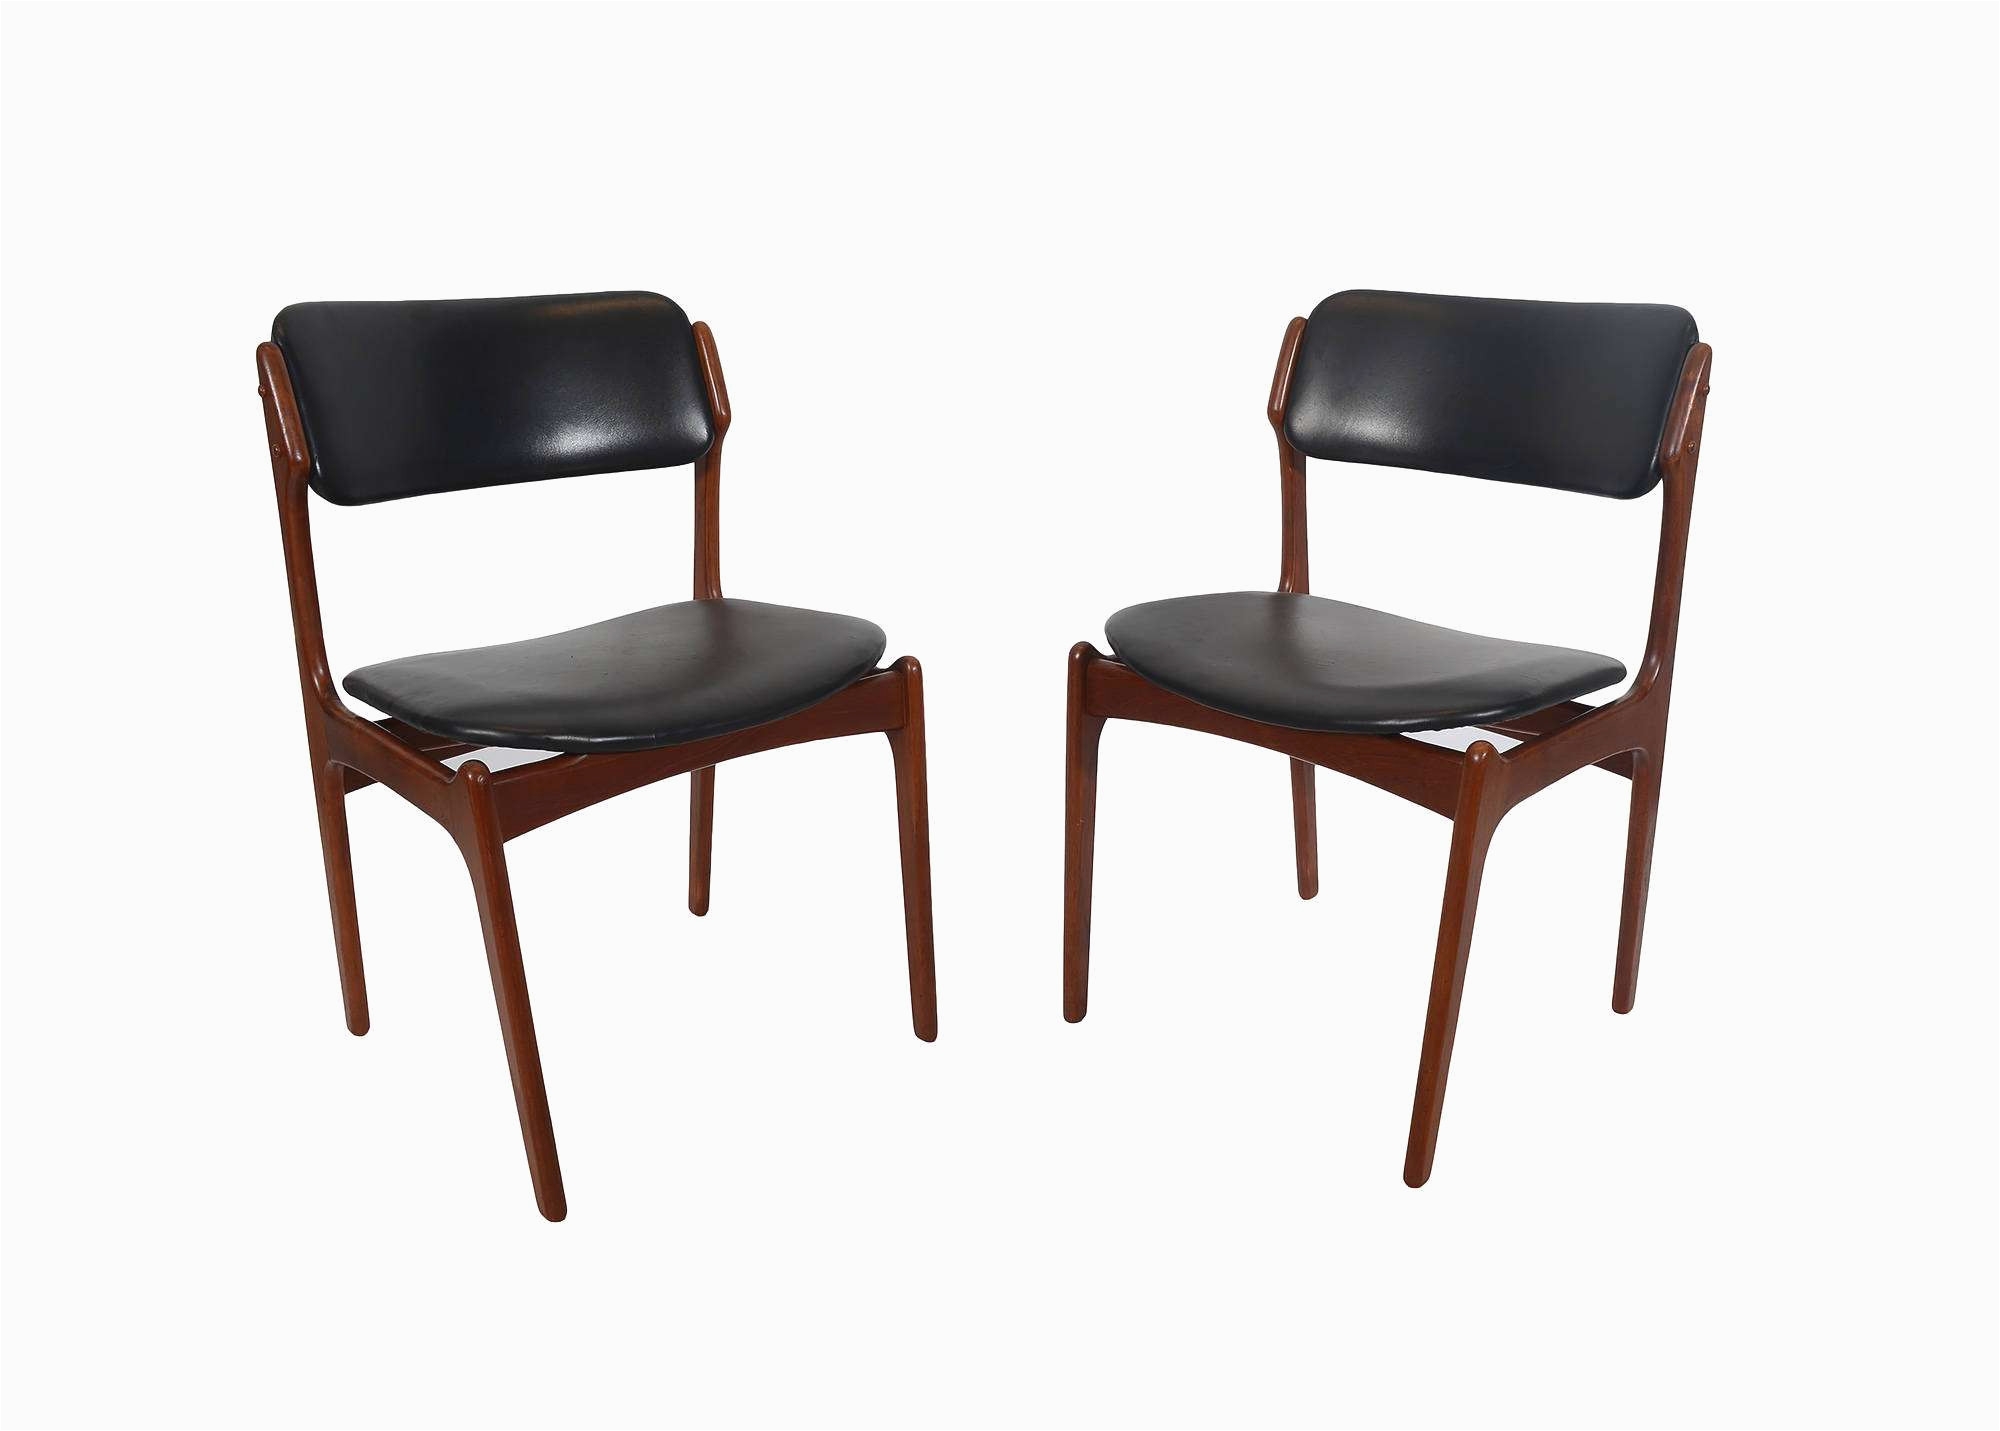 Charlie Modern Wingback Dining Chair Chair Modern Wingback Dining Chair Fantastic 6 Teak Dining Chairs